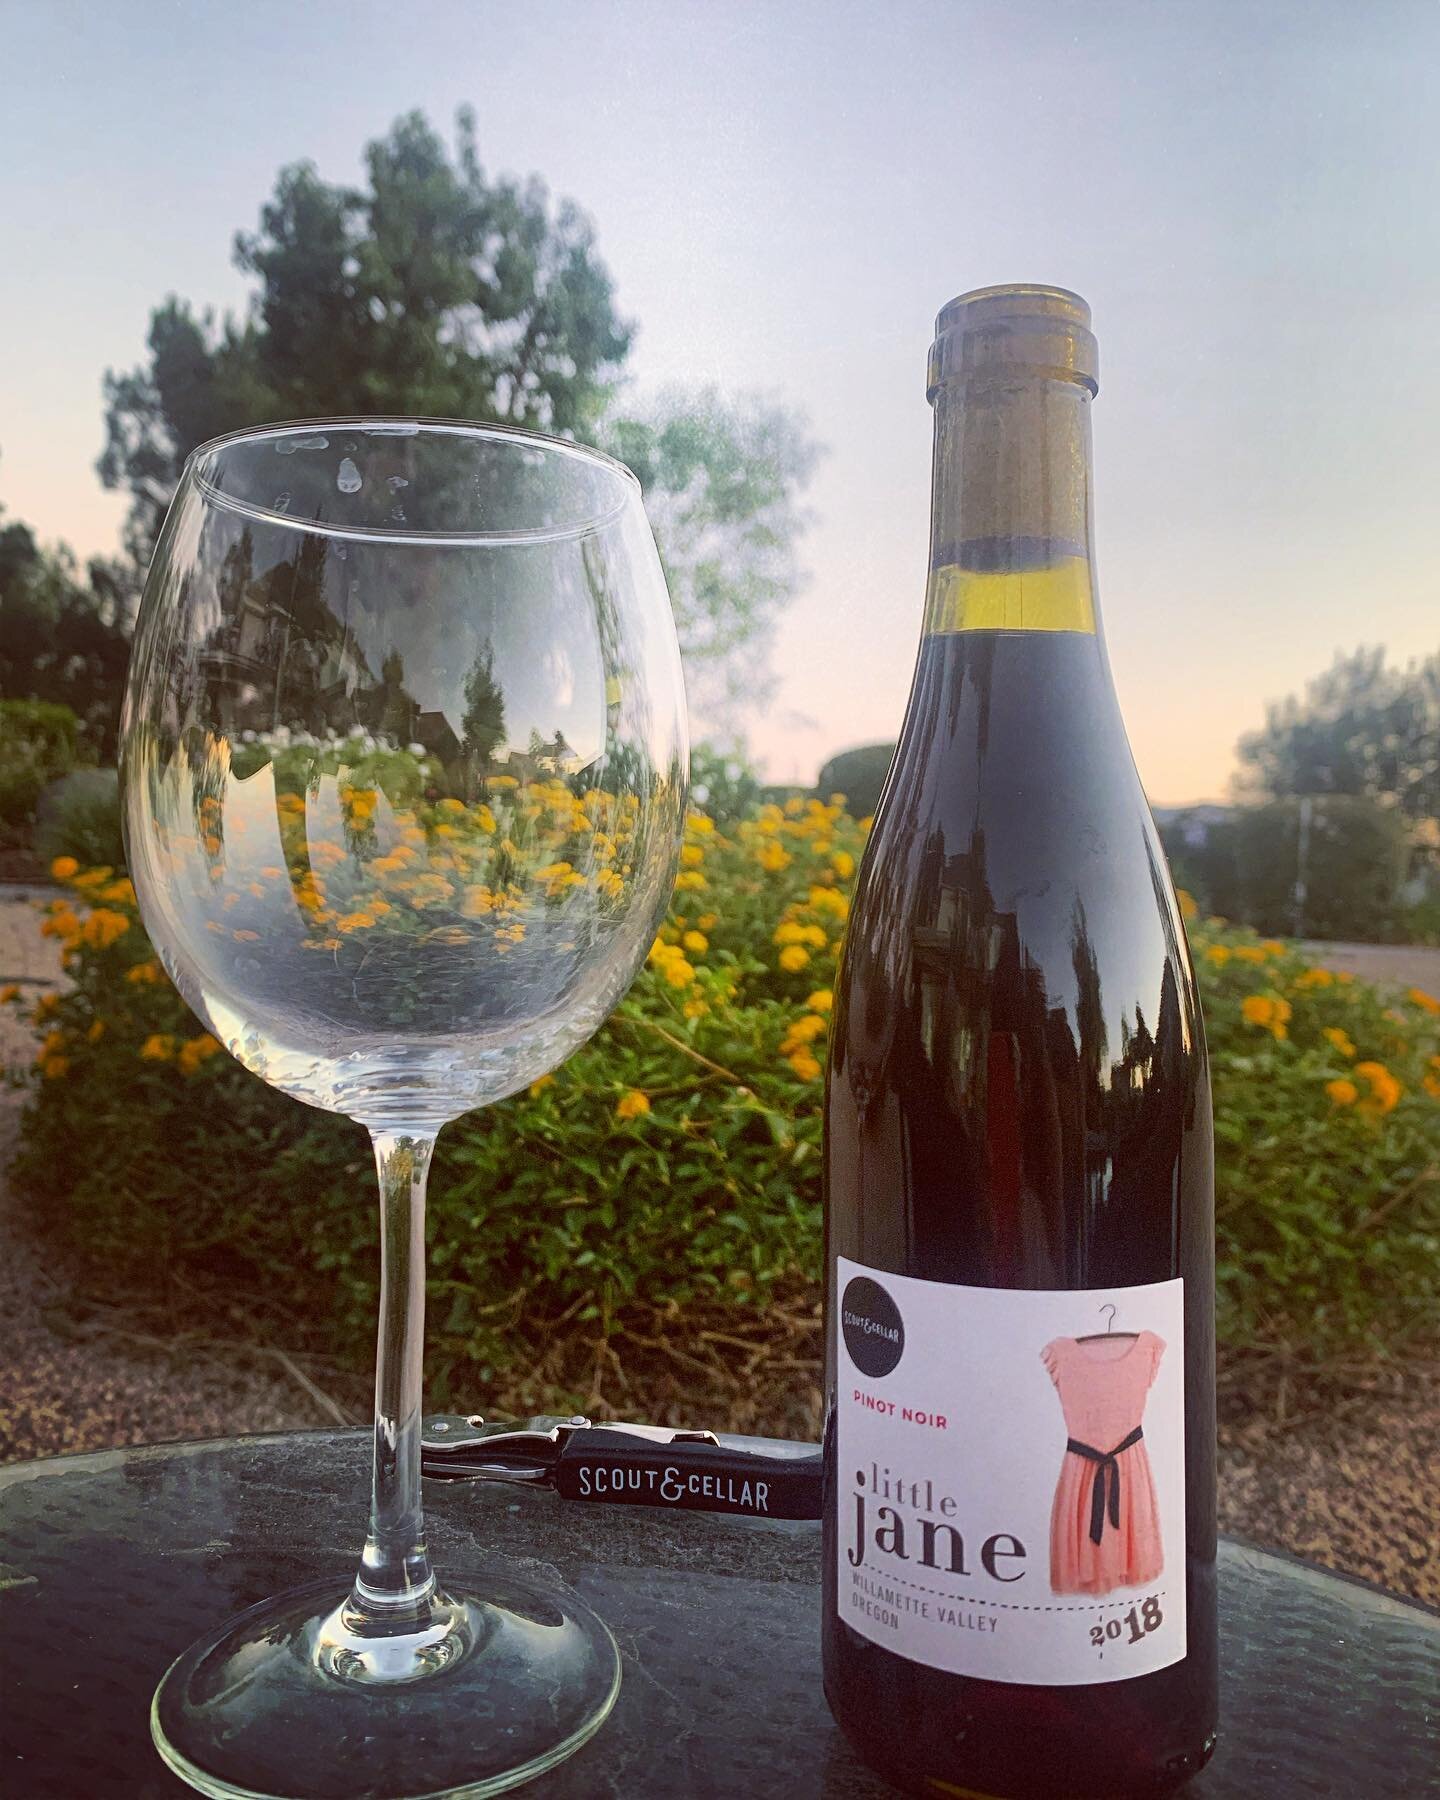 Little Jane... Big Glass...

&ldquo;For this Pinot Noir, grapes were handpicked from 20-year-old vines then sorted, destemmed and placed in steel tanks to ferment for 1-2 weeks on native yeasts. The wine then aged in neutral French Oak barrels for 11